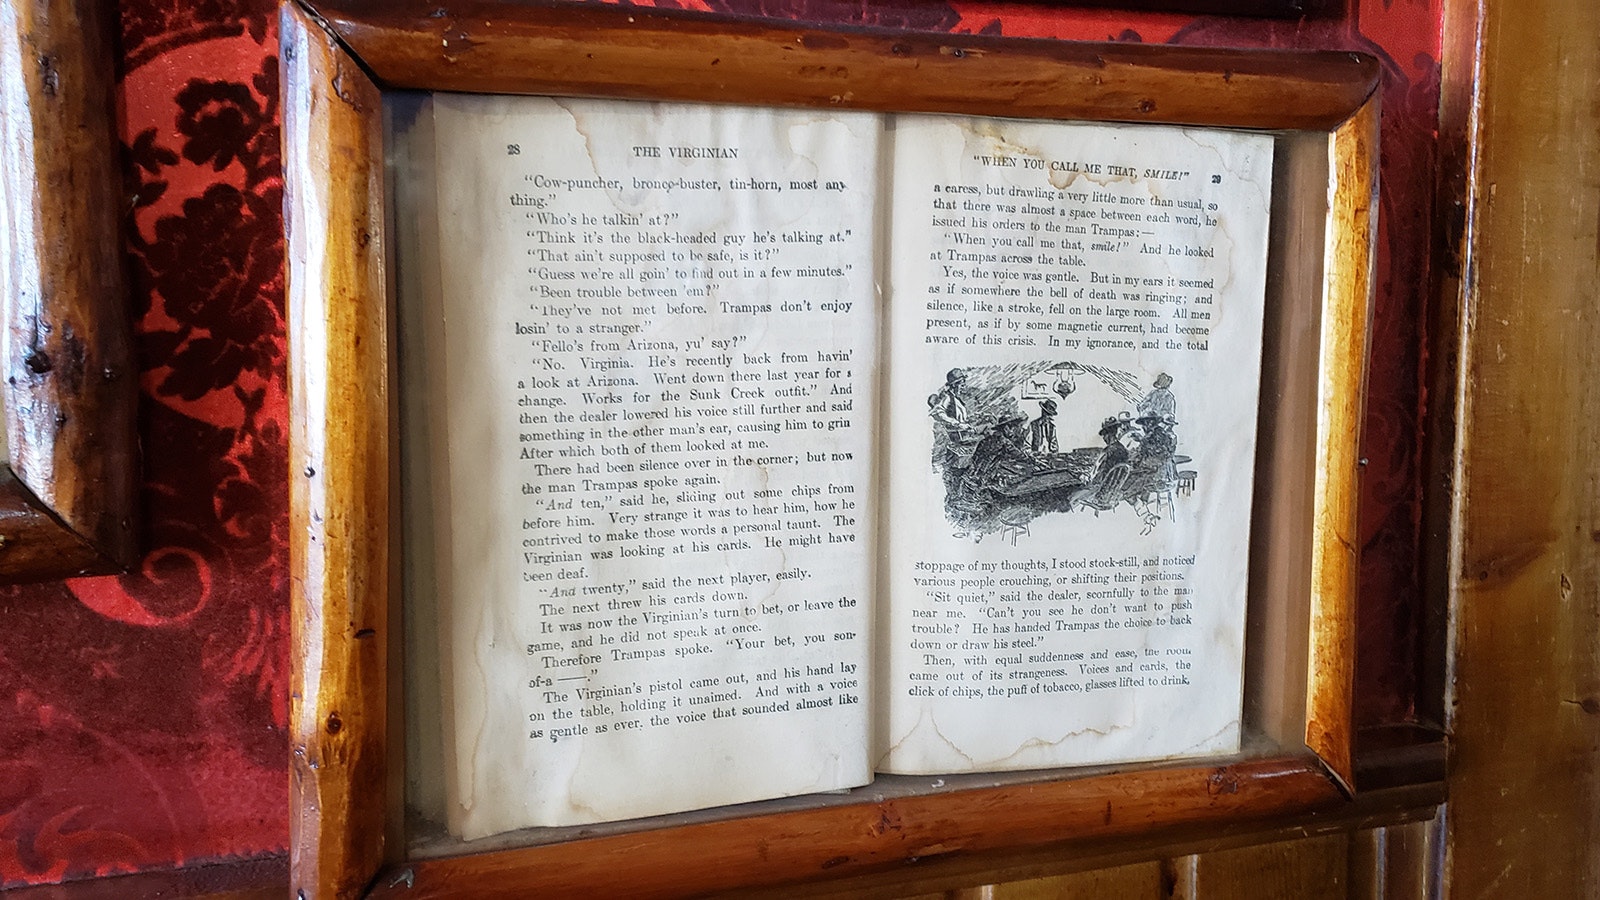 A framed page from the novel "The Virginian."